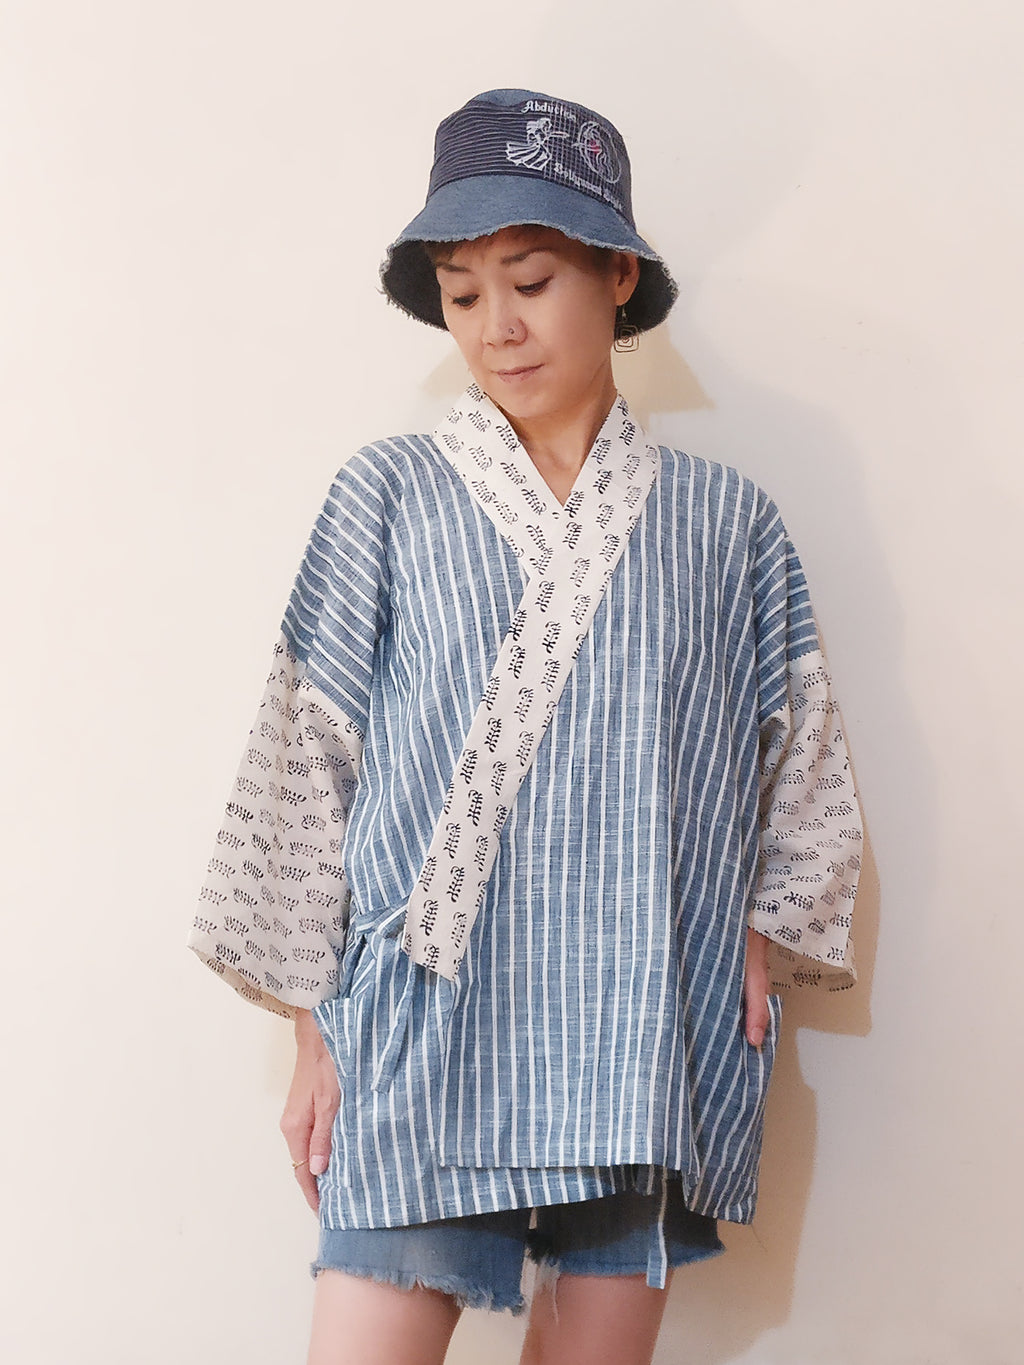 Kimono Jacket with a handloom cotton stripe with a delicate Mul Mul white (and blue) cotton print. Very very comfy, light, chic and calming. Buy online.